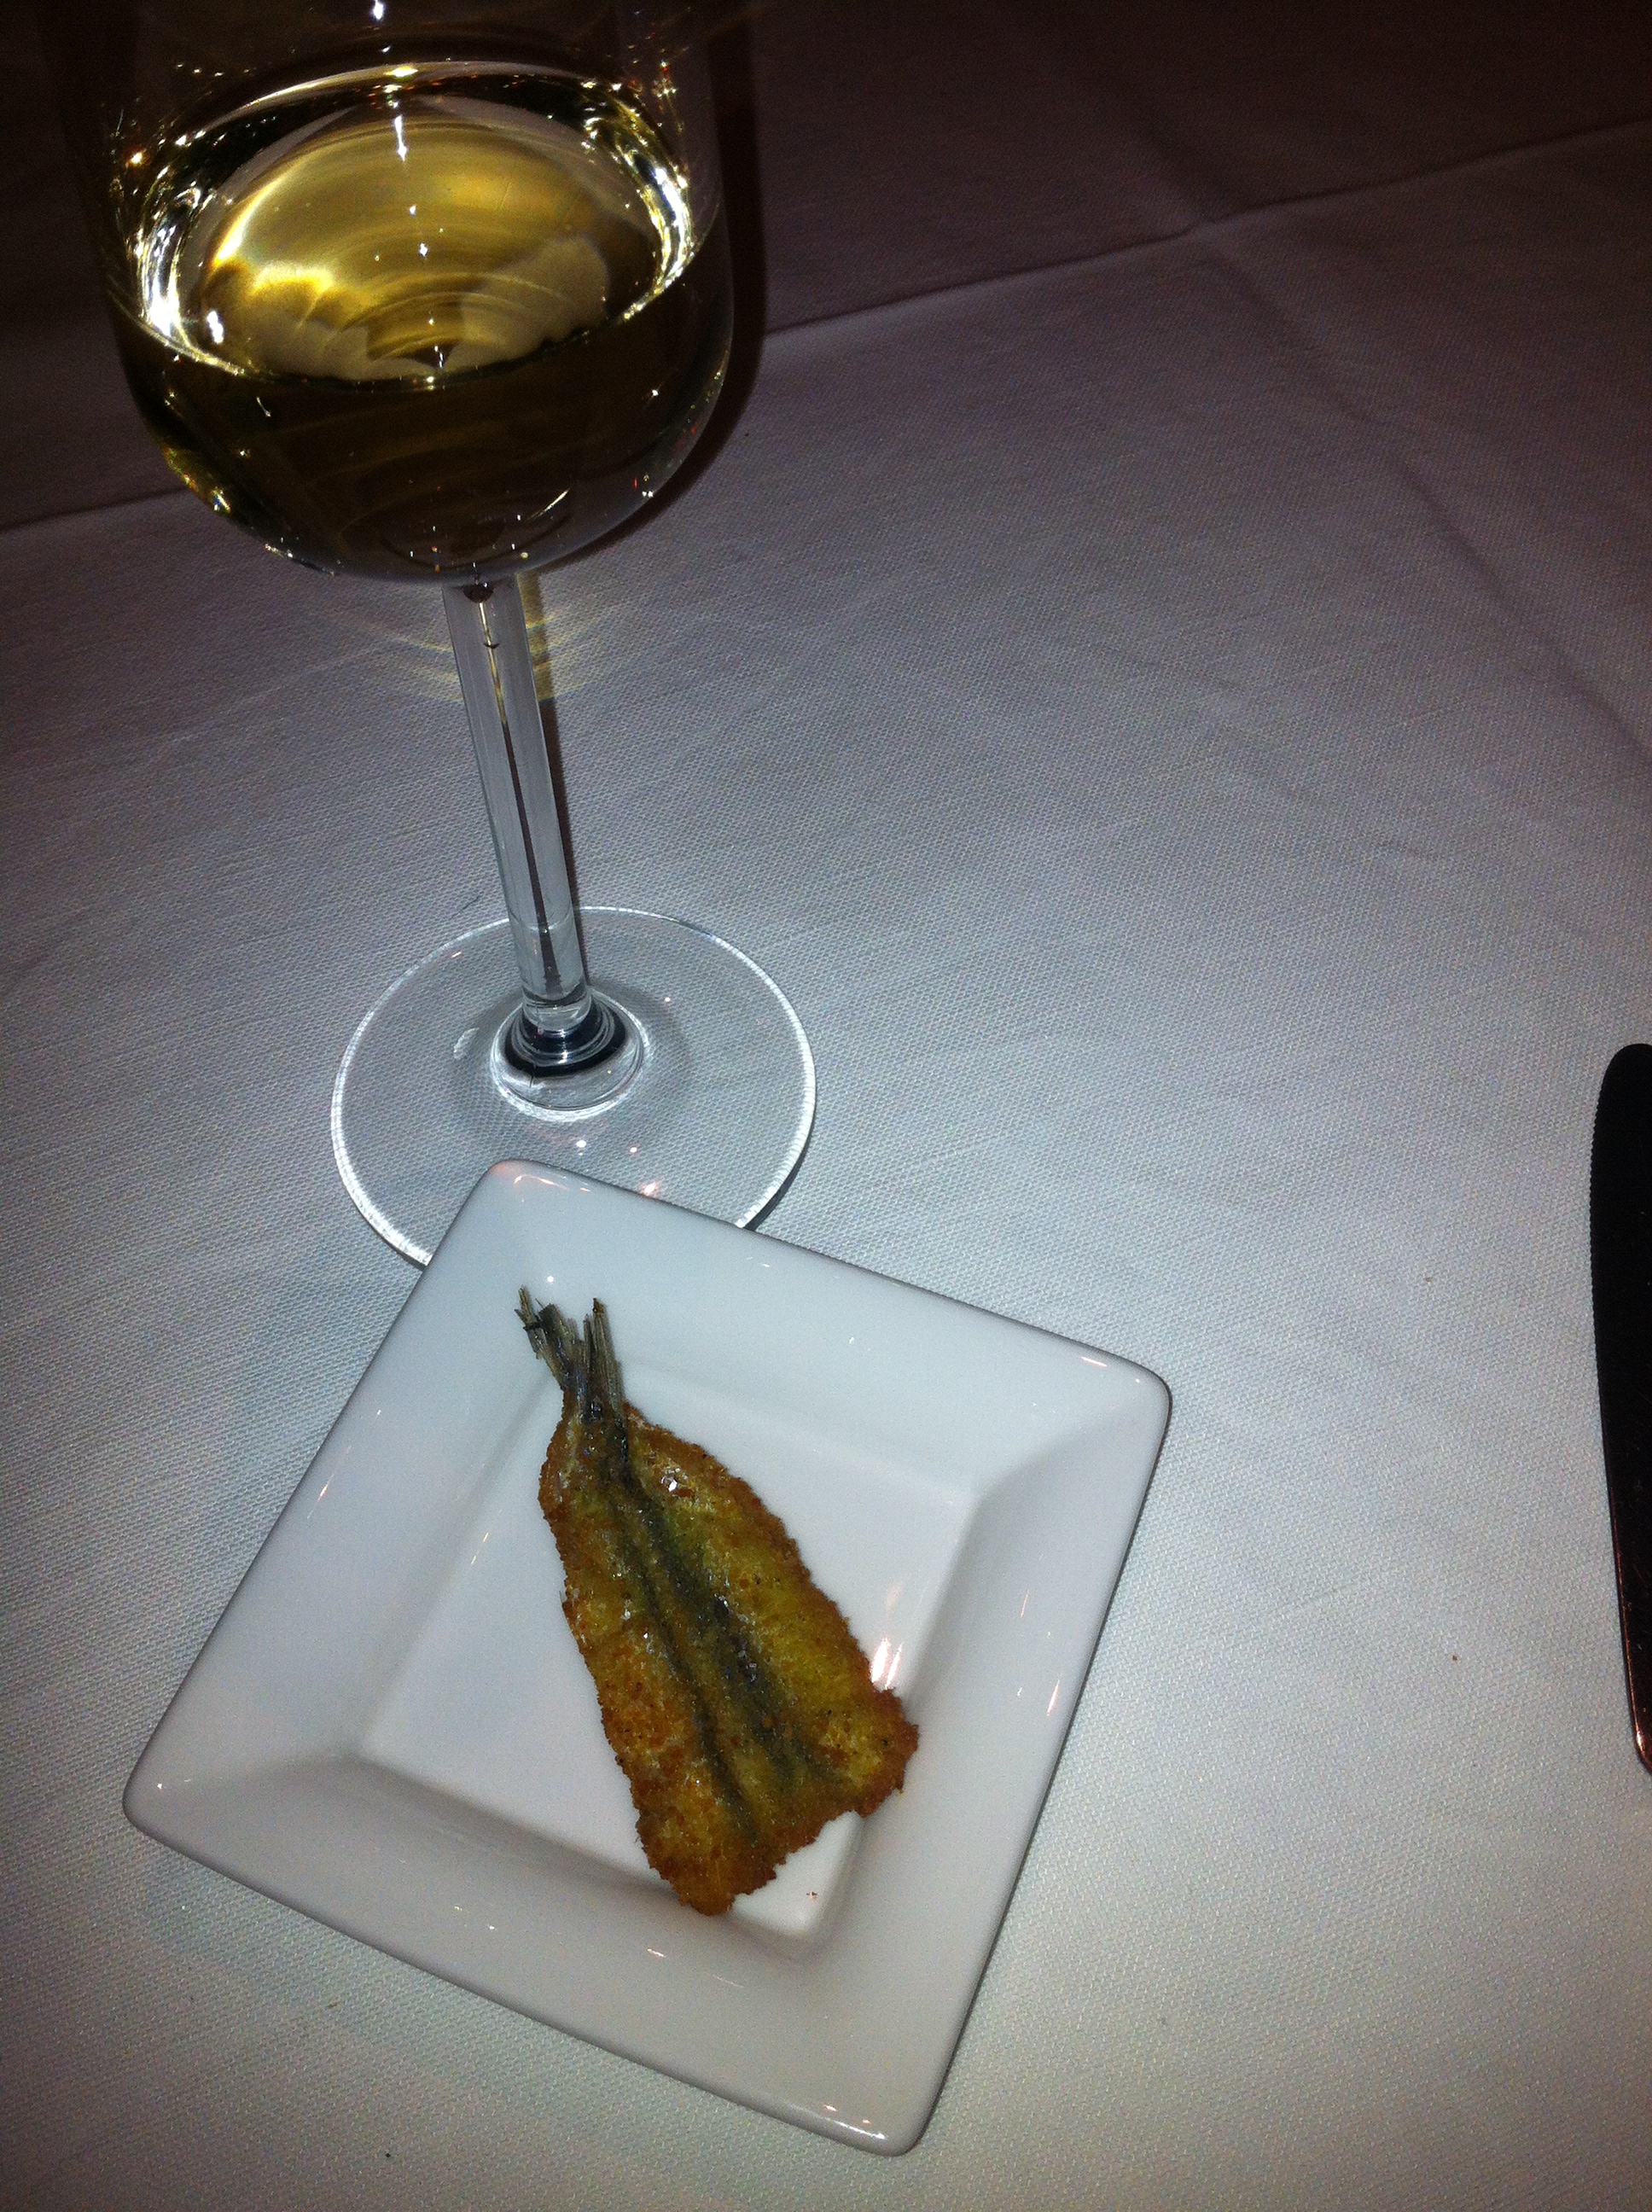 "grisara" and fried anchovies